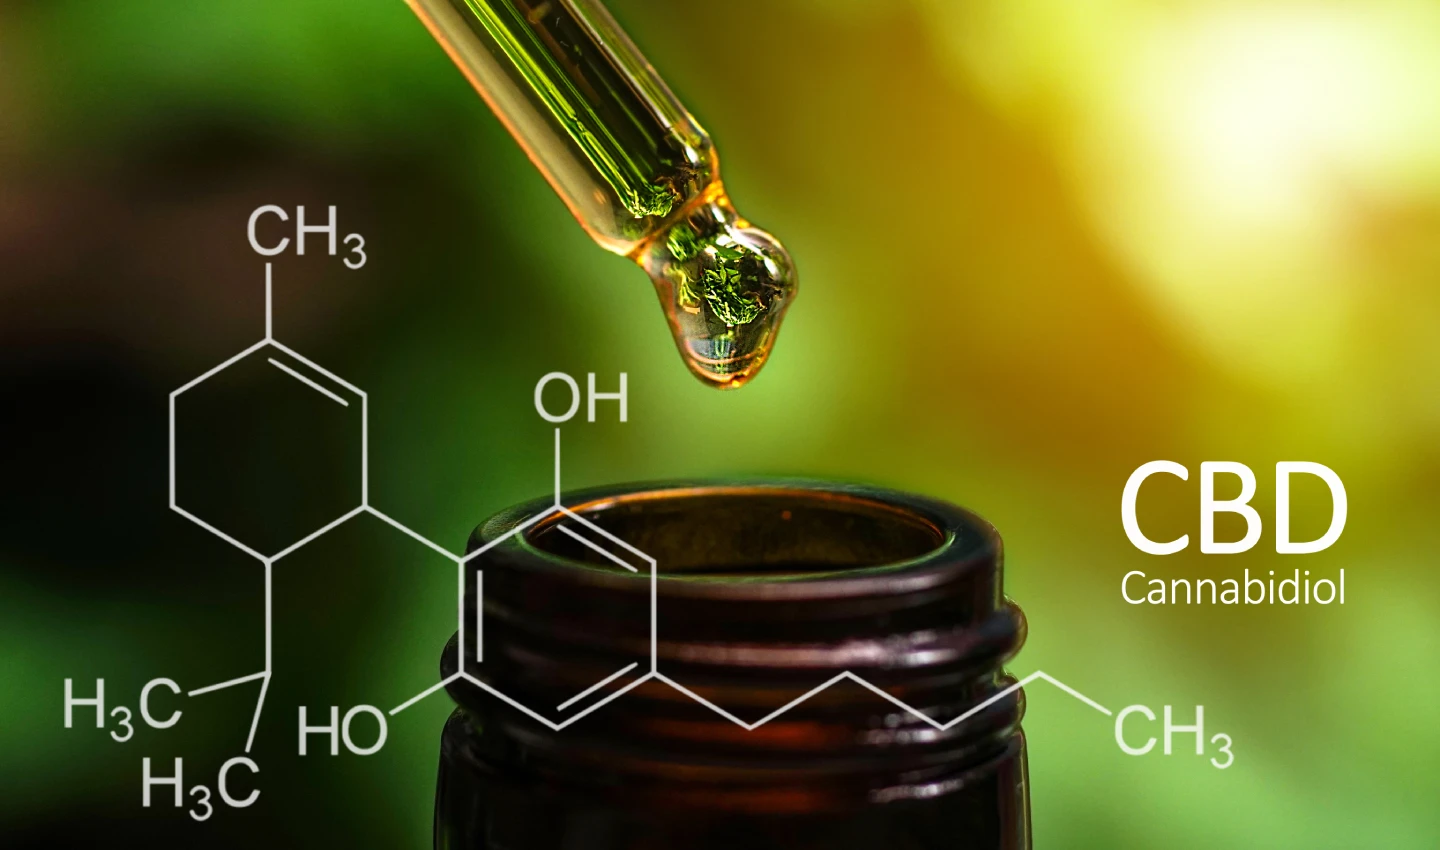 CBD for Men's Body Care - An image of a dropper releasing a drip of liquid into a brown bottle. The chemical formula on the bottle emphasizes the natural and scientific aspects of CBD. The image suggests the benefits of using CBD in men's body care products, including reducing inflammation, promoting relaxation, and improving skin health.